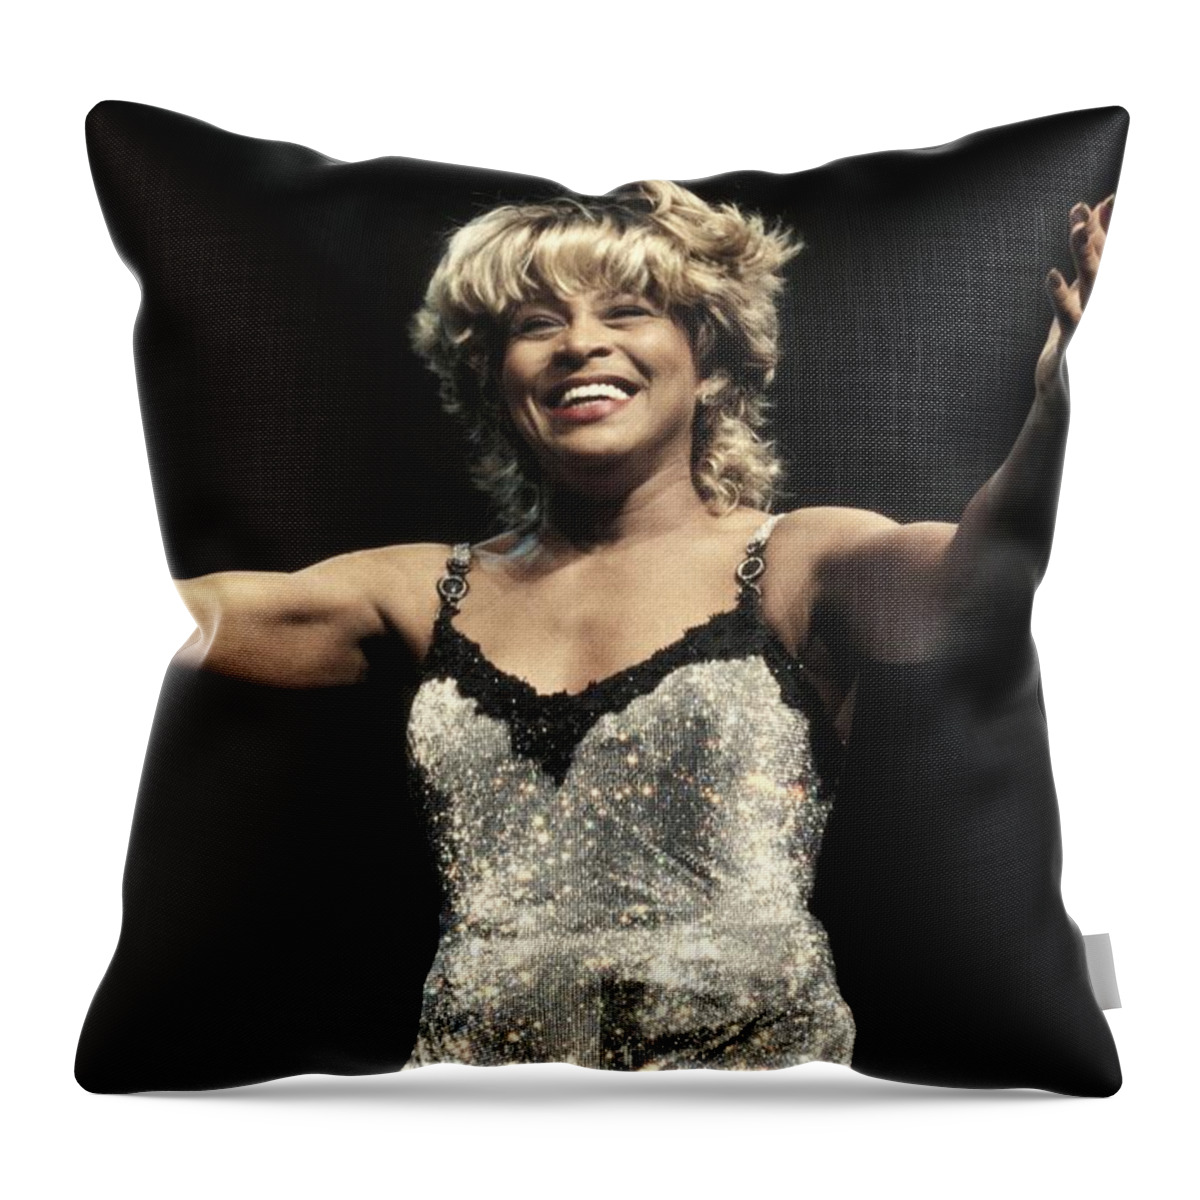 Rock 'n' Roll Throw Pillow featuring the photograph Tina Turner by Concert Photos